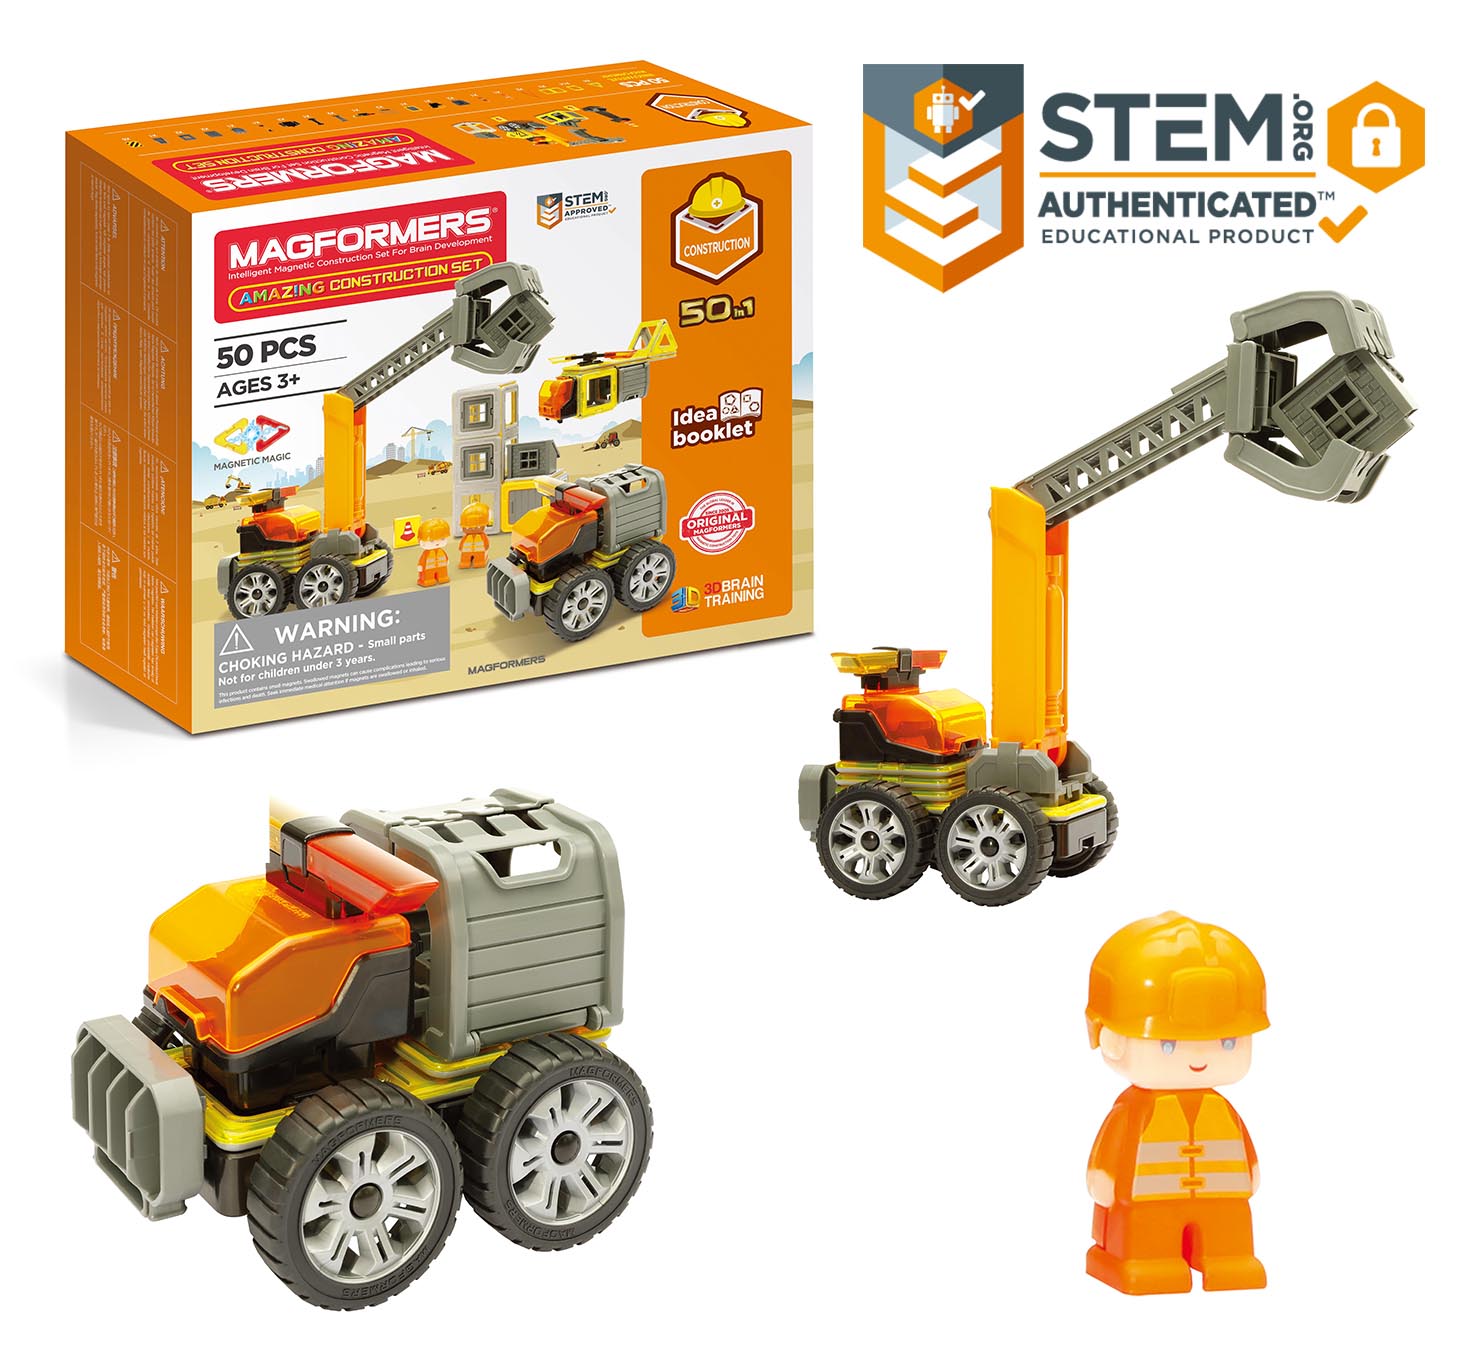 Magformers Amazing Construction 50 Pieces, Wheels, Orange colors, Magnetic Geometric tiles STEM Toy Ages 3+ - image 6 of 6